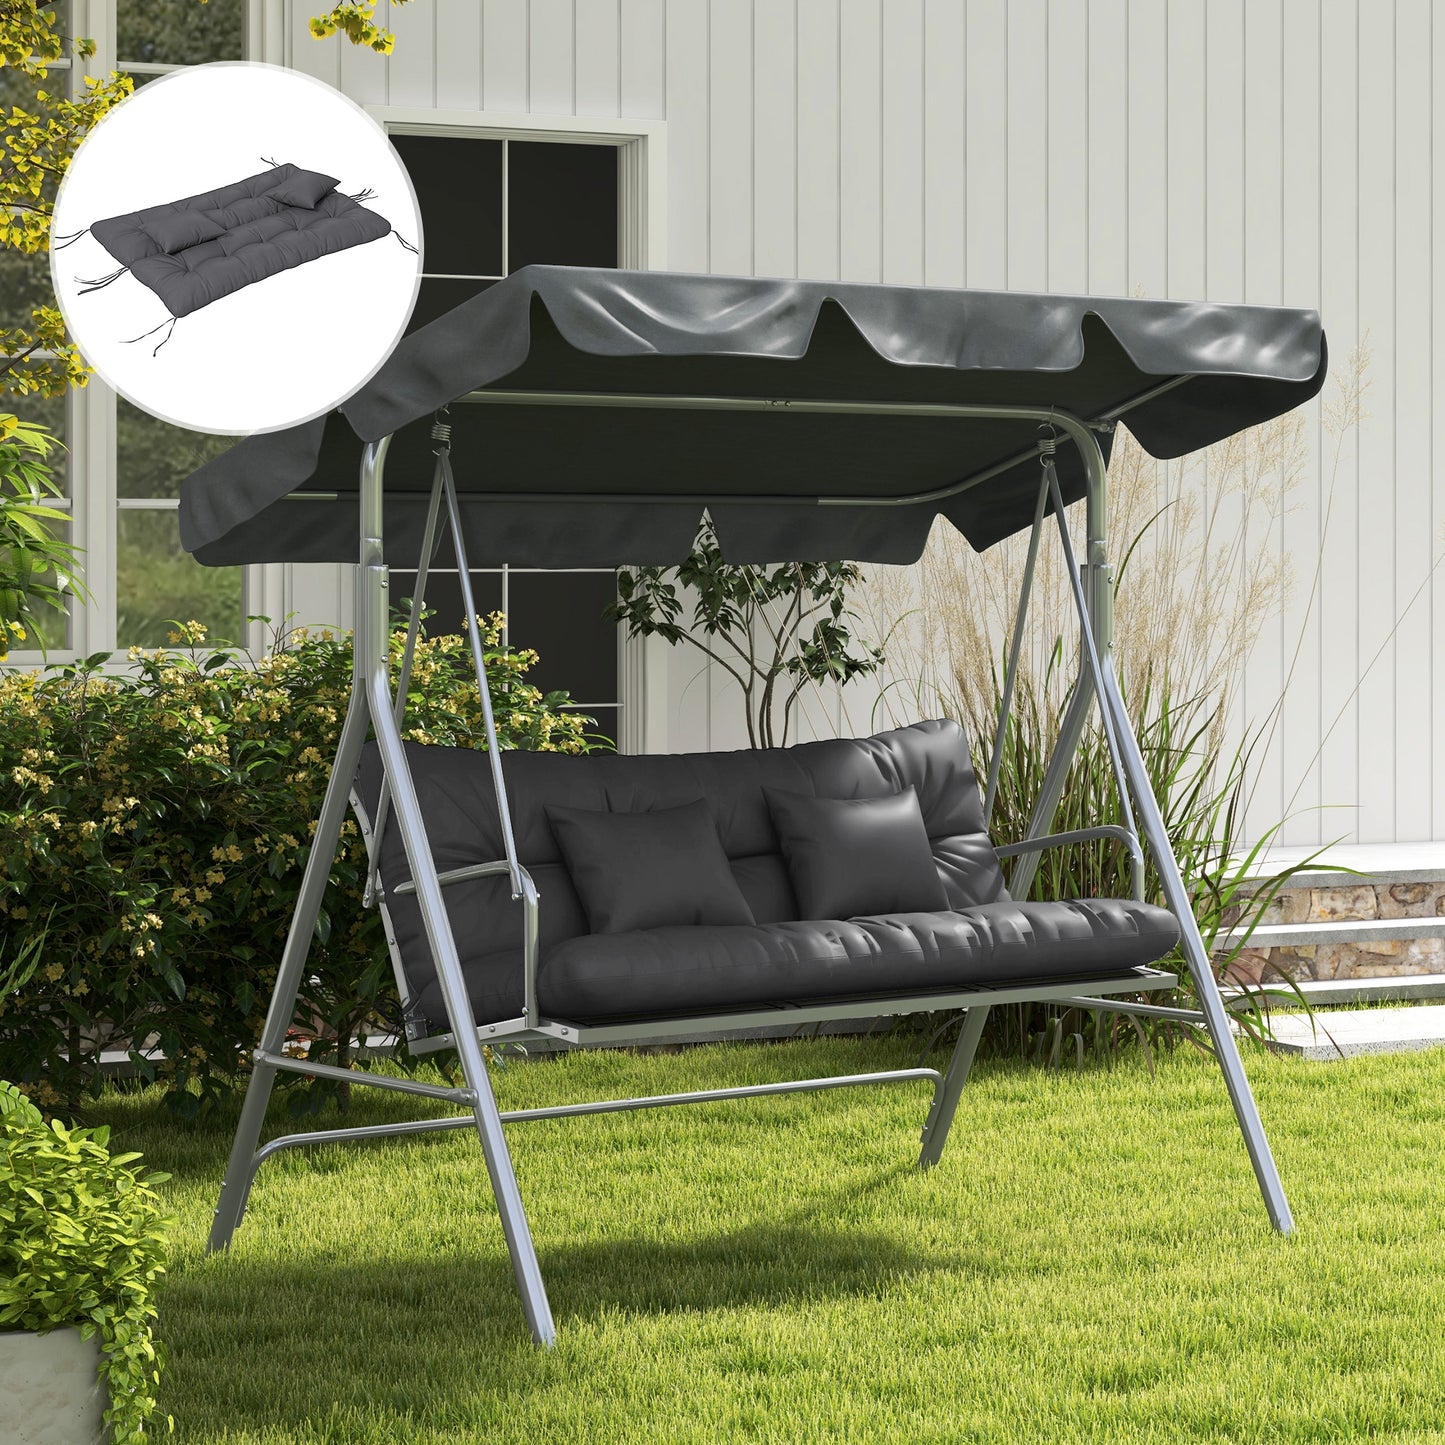 Outsunny Patio Chair Cushion Refresh: 4-Piece Set with Back & Seat Pads, 2 Pillows, Ties, Charcoal Grey Hue